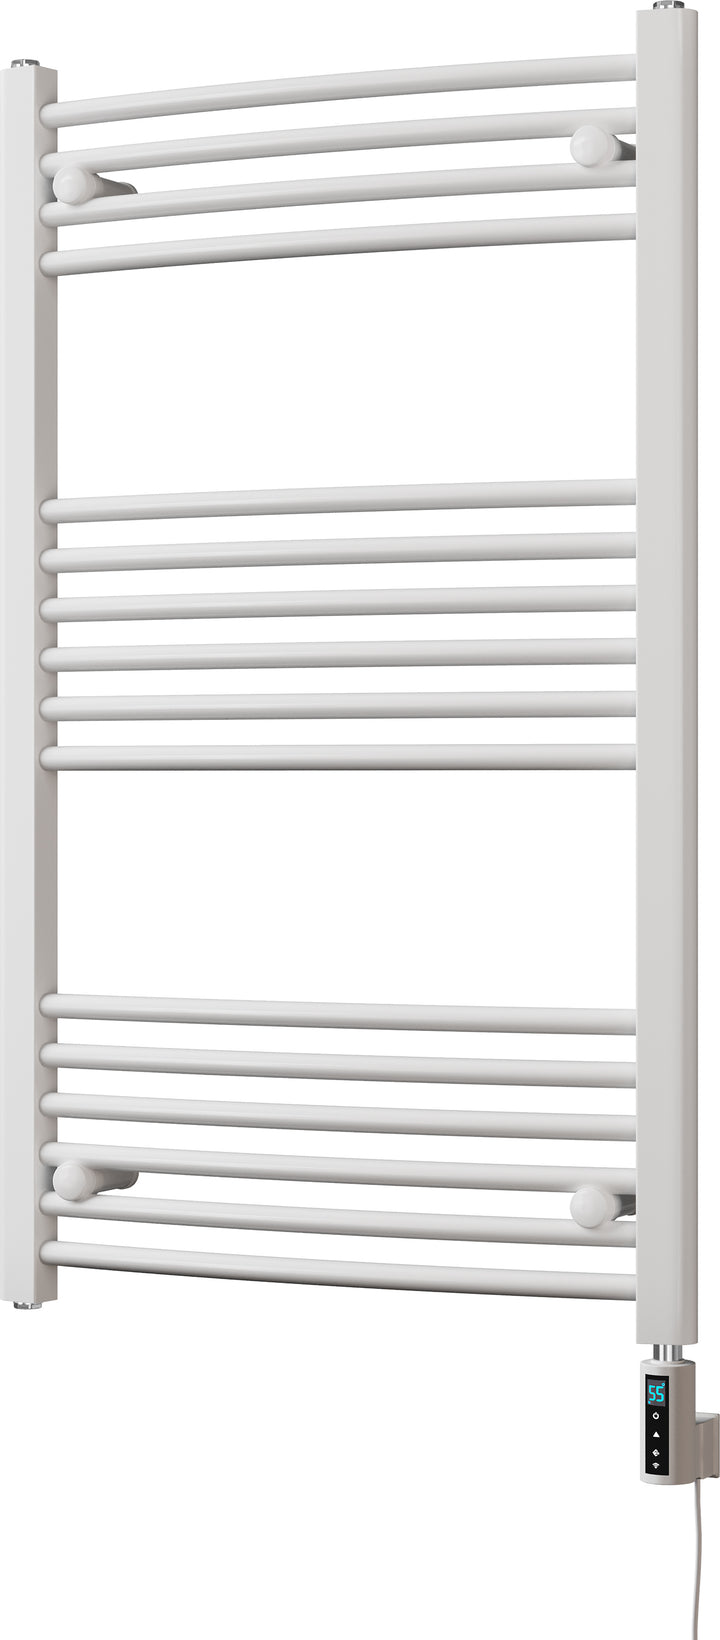 Zennor - White Electric Towel Rail H1000mm x W600mm Curved 300w Thermostatic WIFI